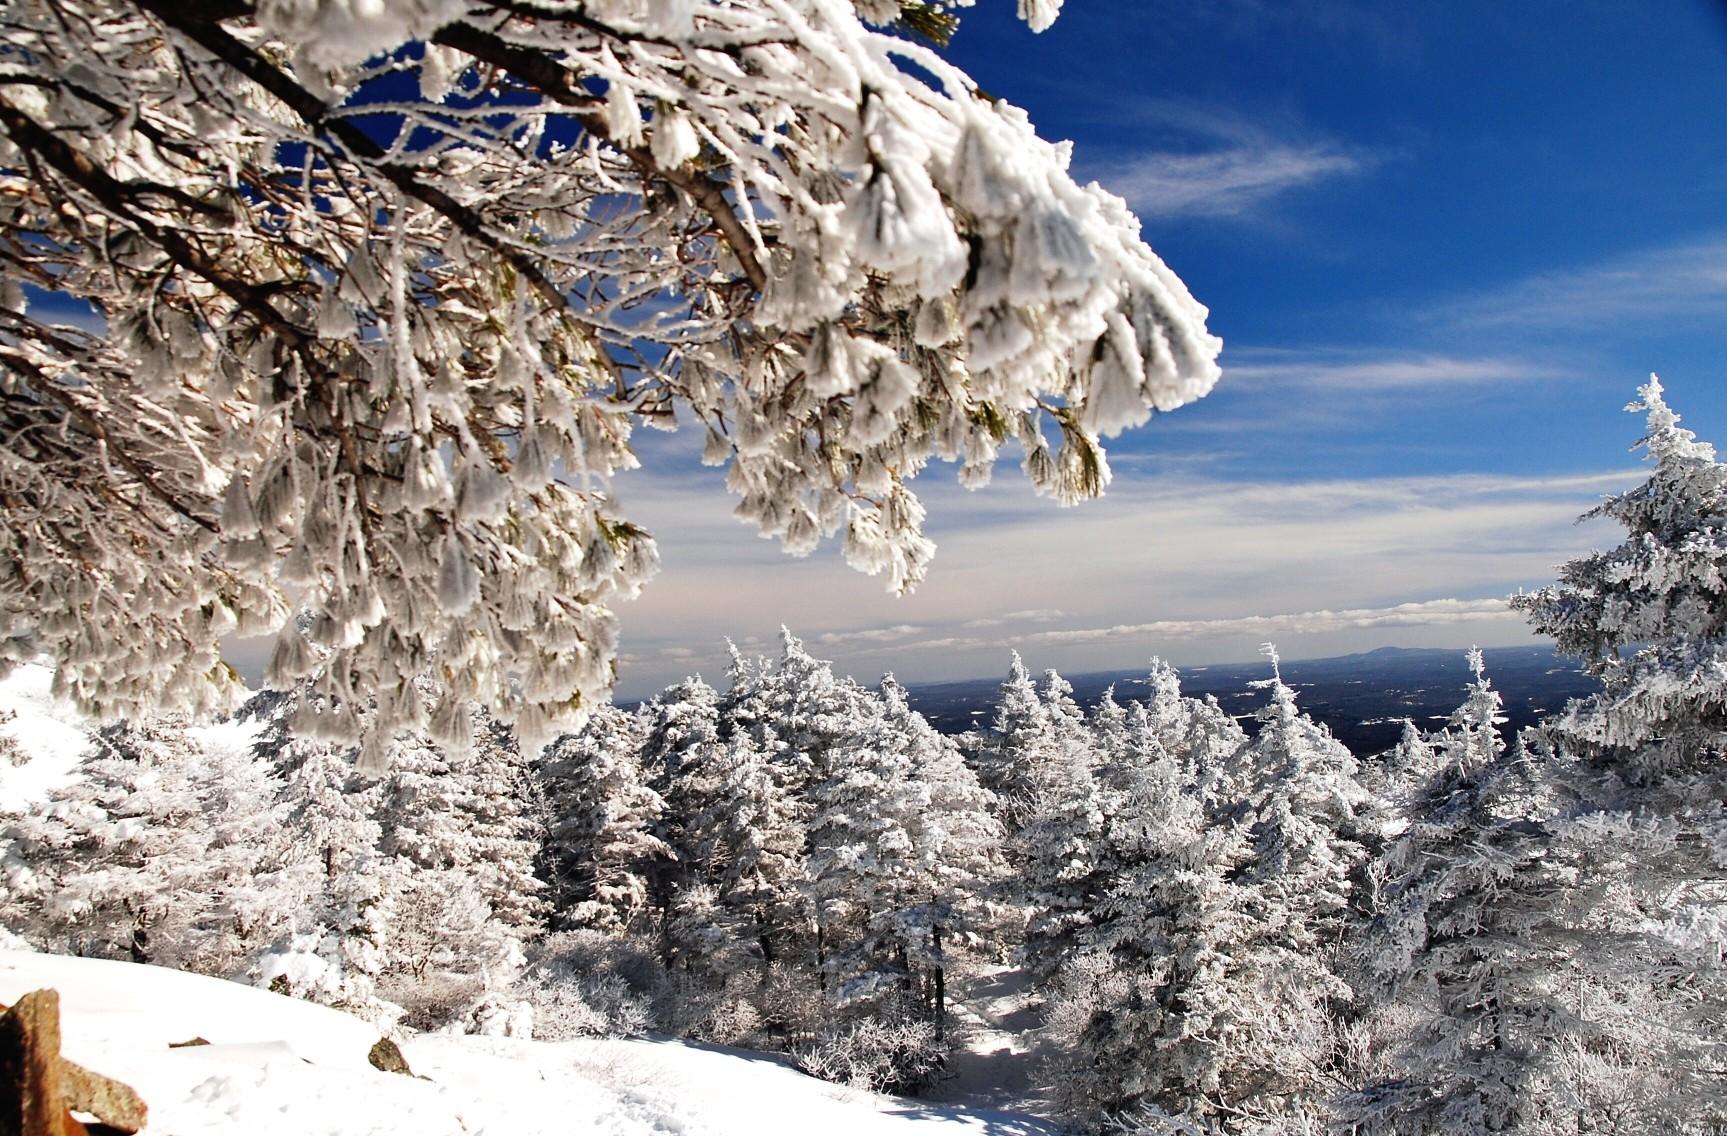 View from a snowy mountain near White Mountains.